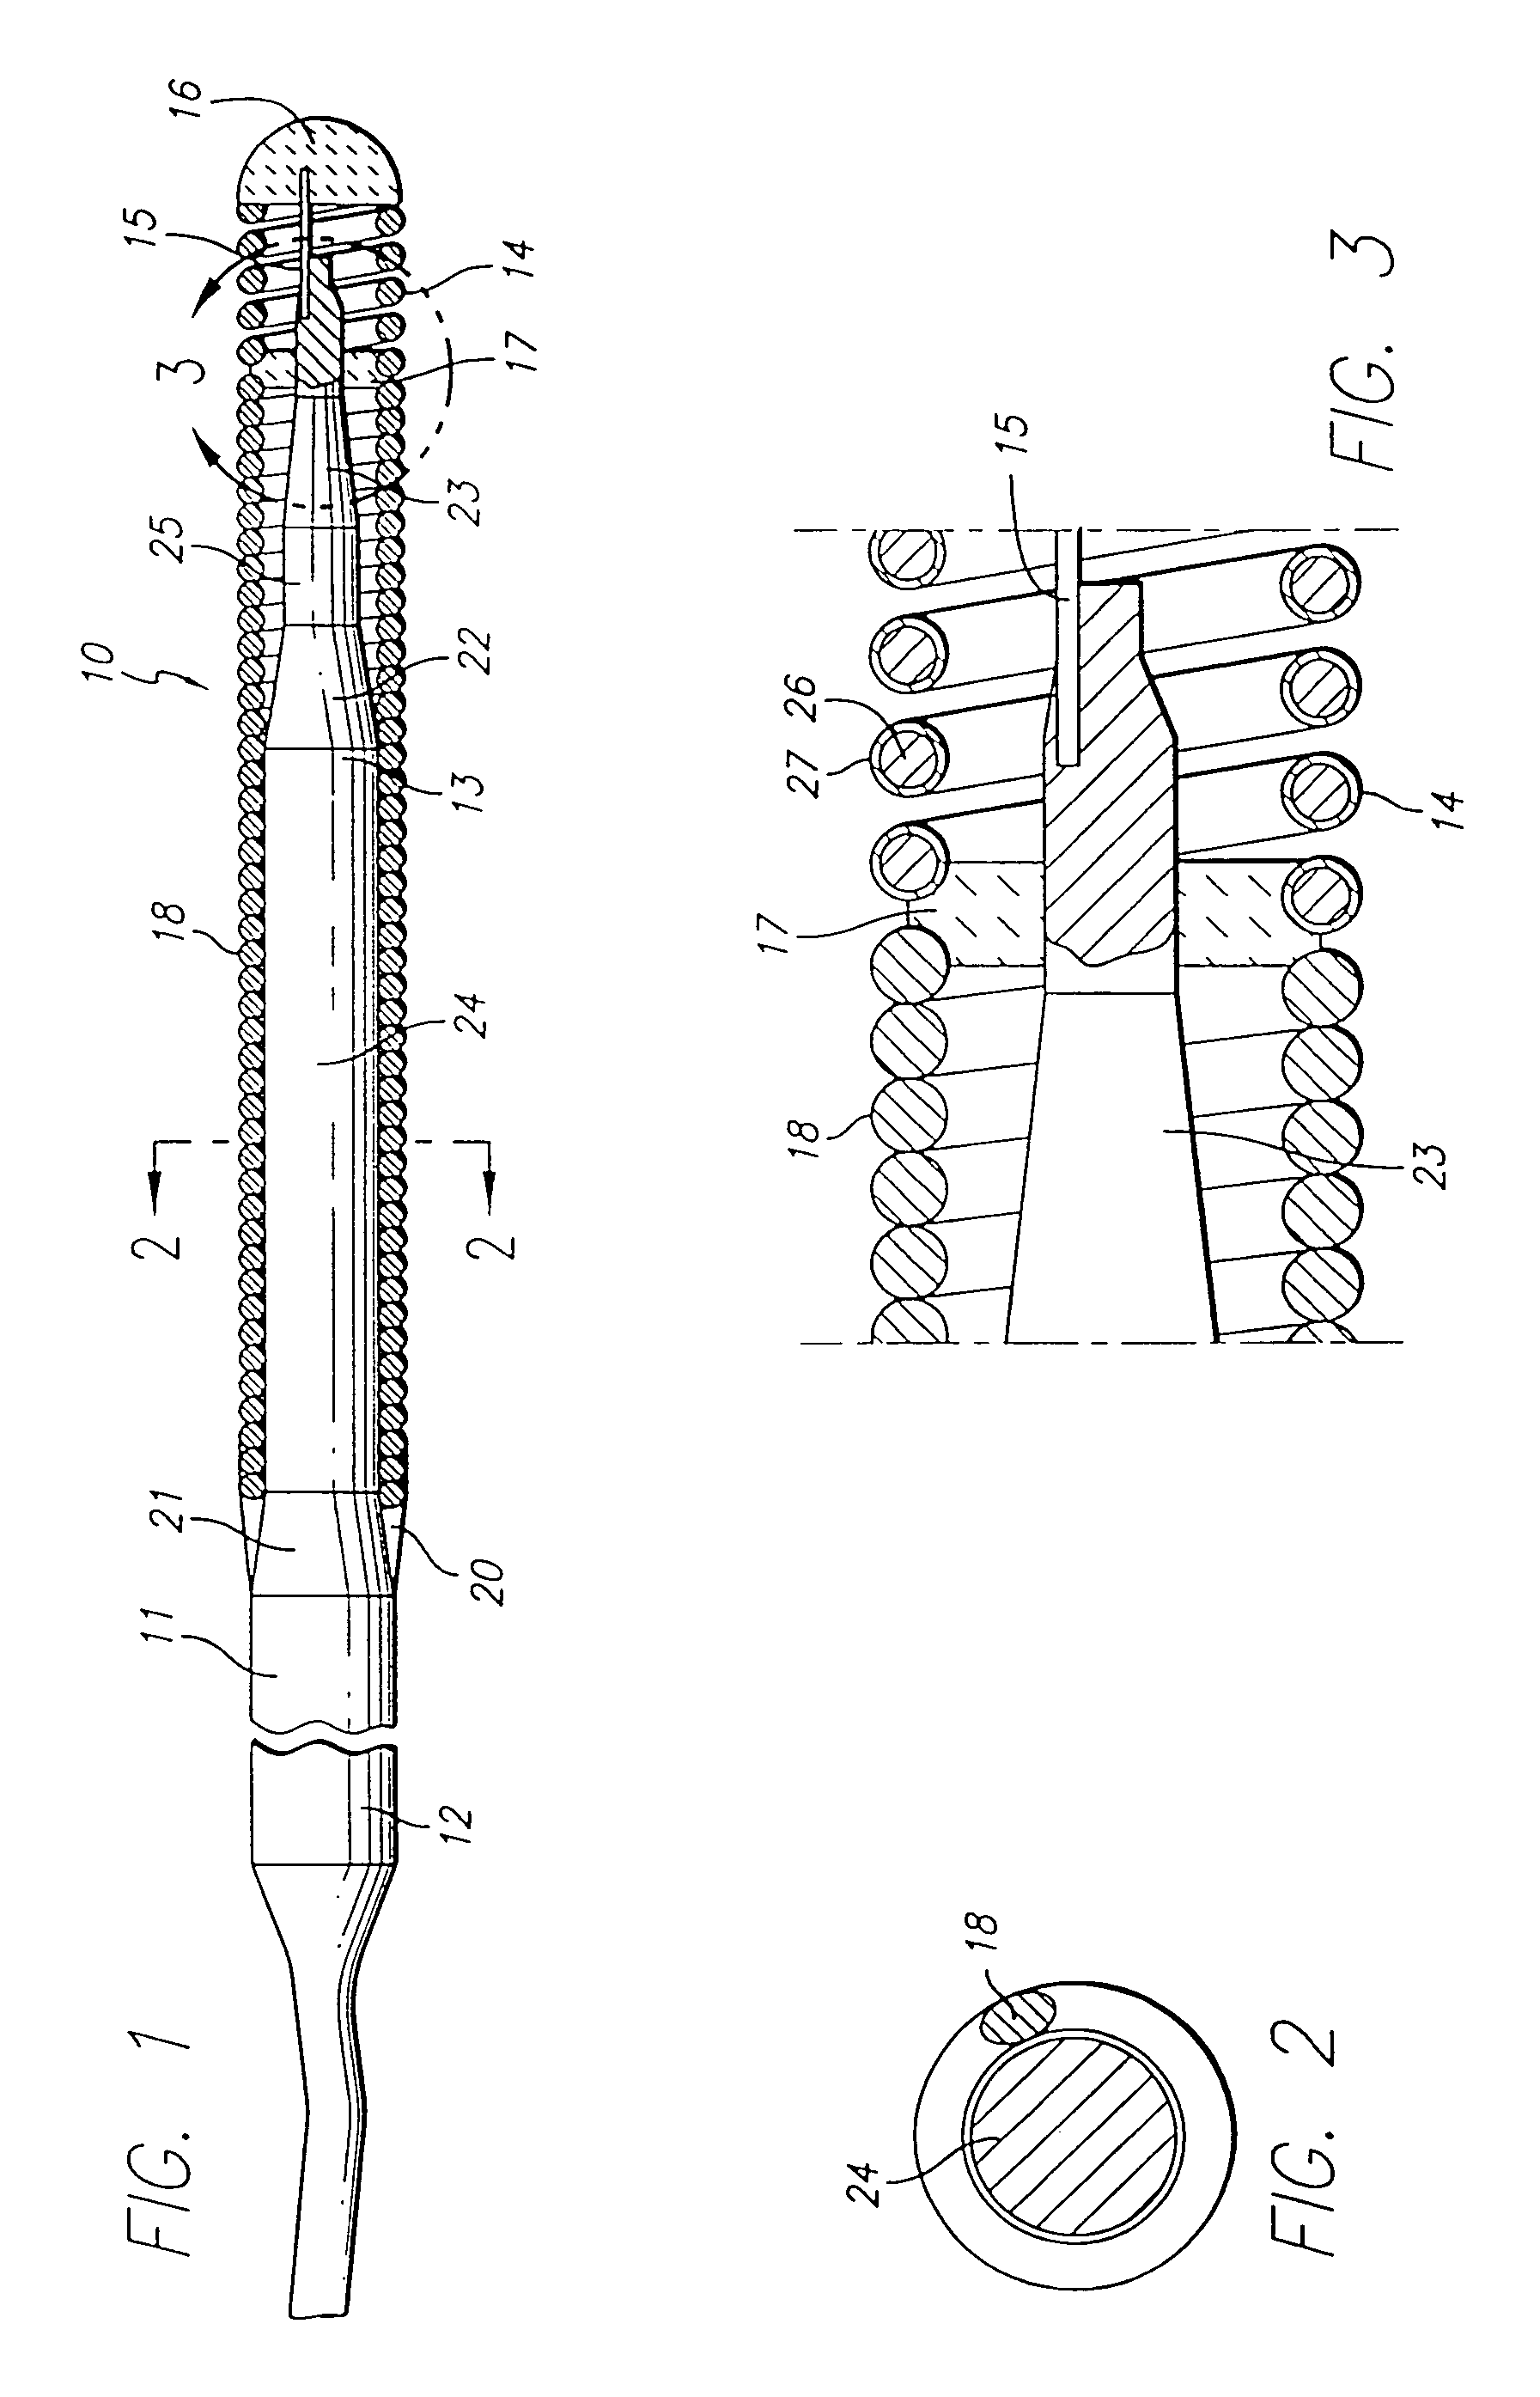 Process for providing composite radiopaque intracorporeal product